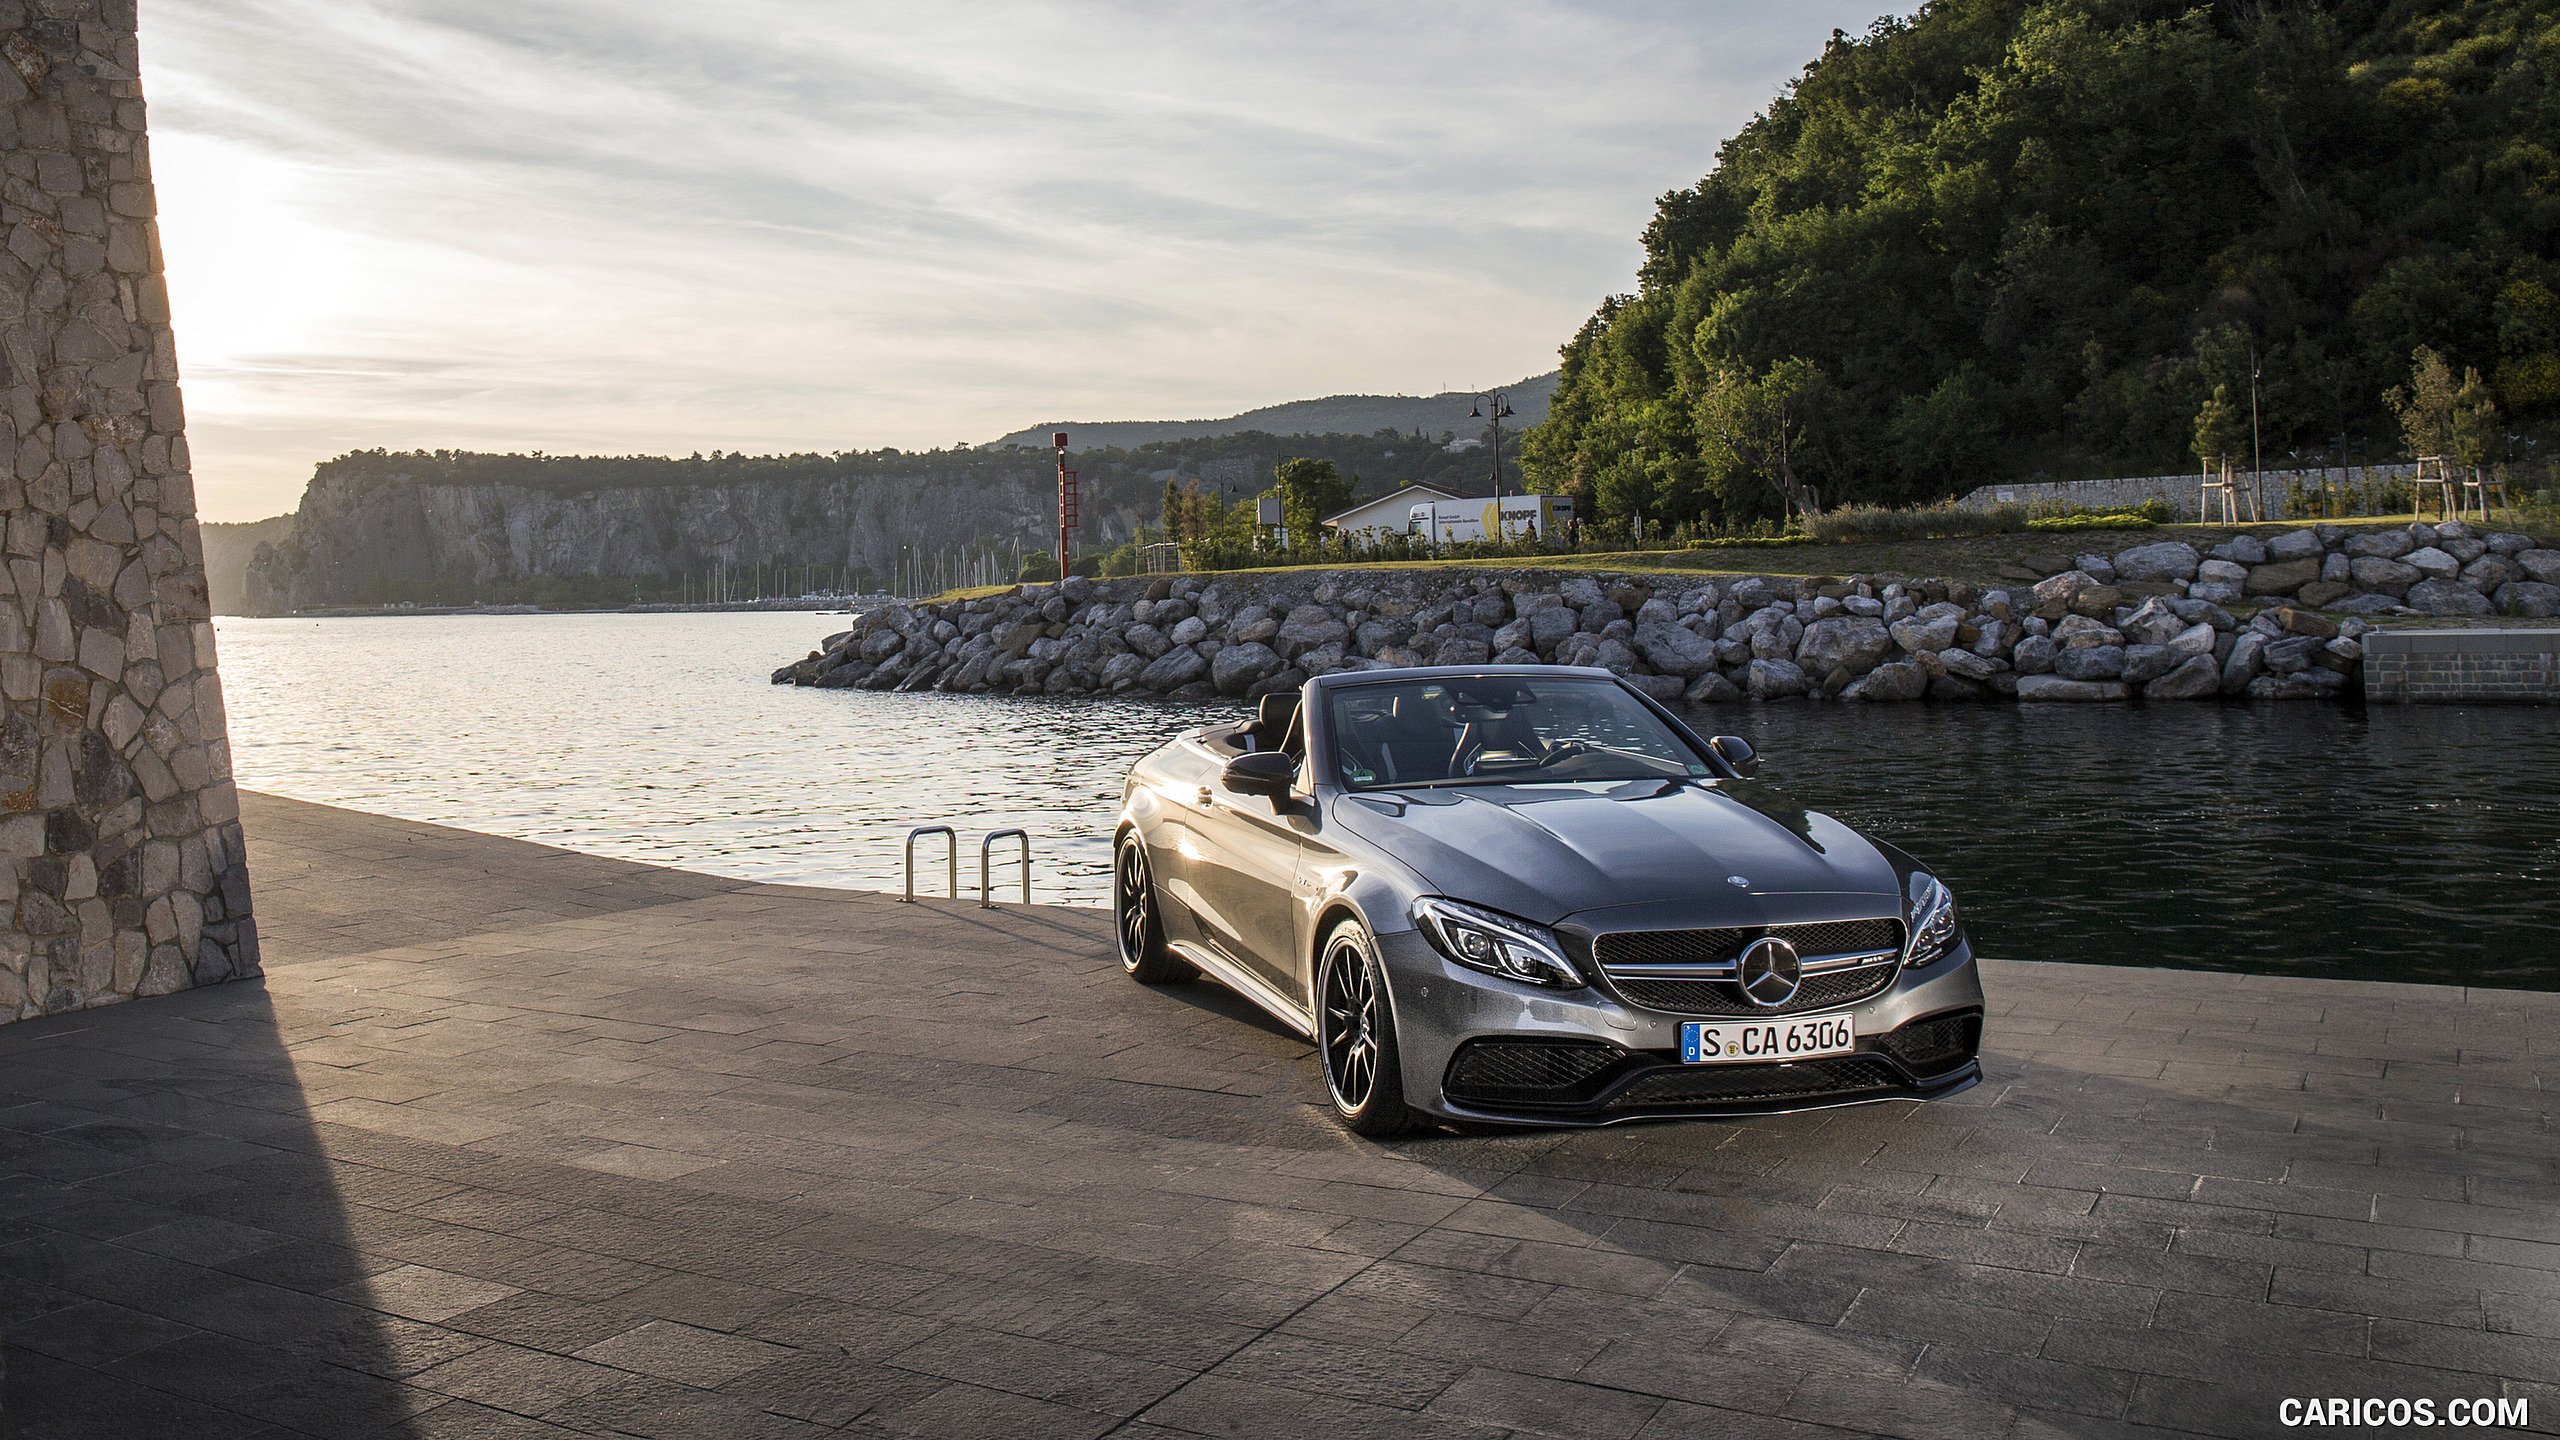 2017 Mercedes-AMG C63 S Cabriolet - Front, #38 of 222